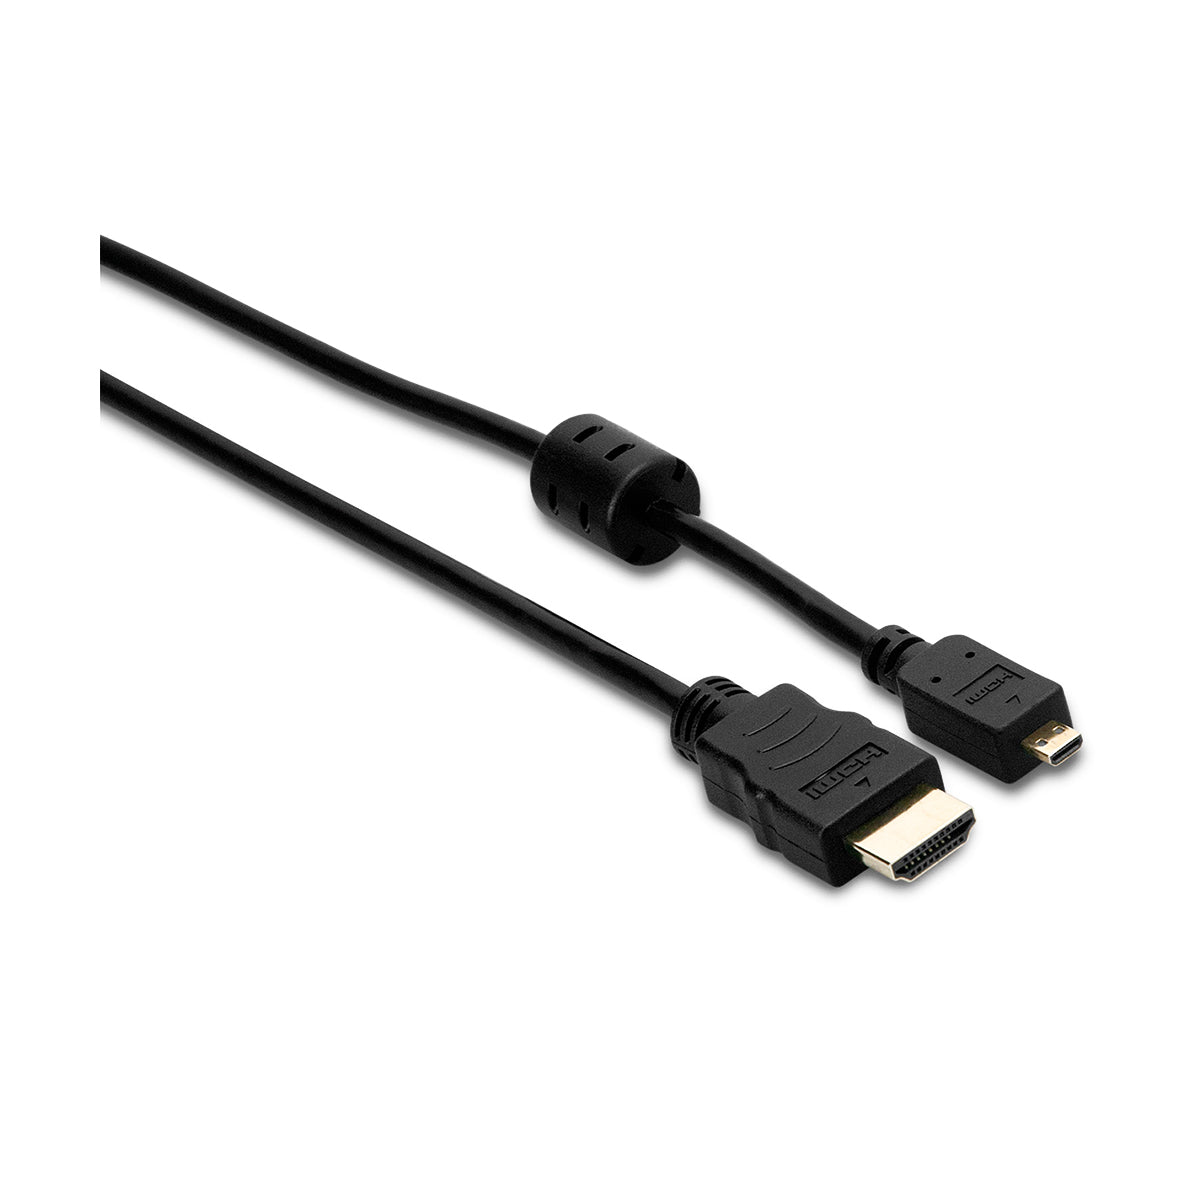 Hosa High Speed HDMI Cable - HDMI to HDMI Micro, 3 ft